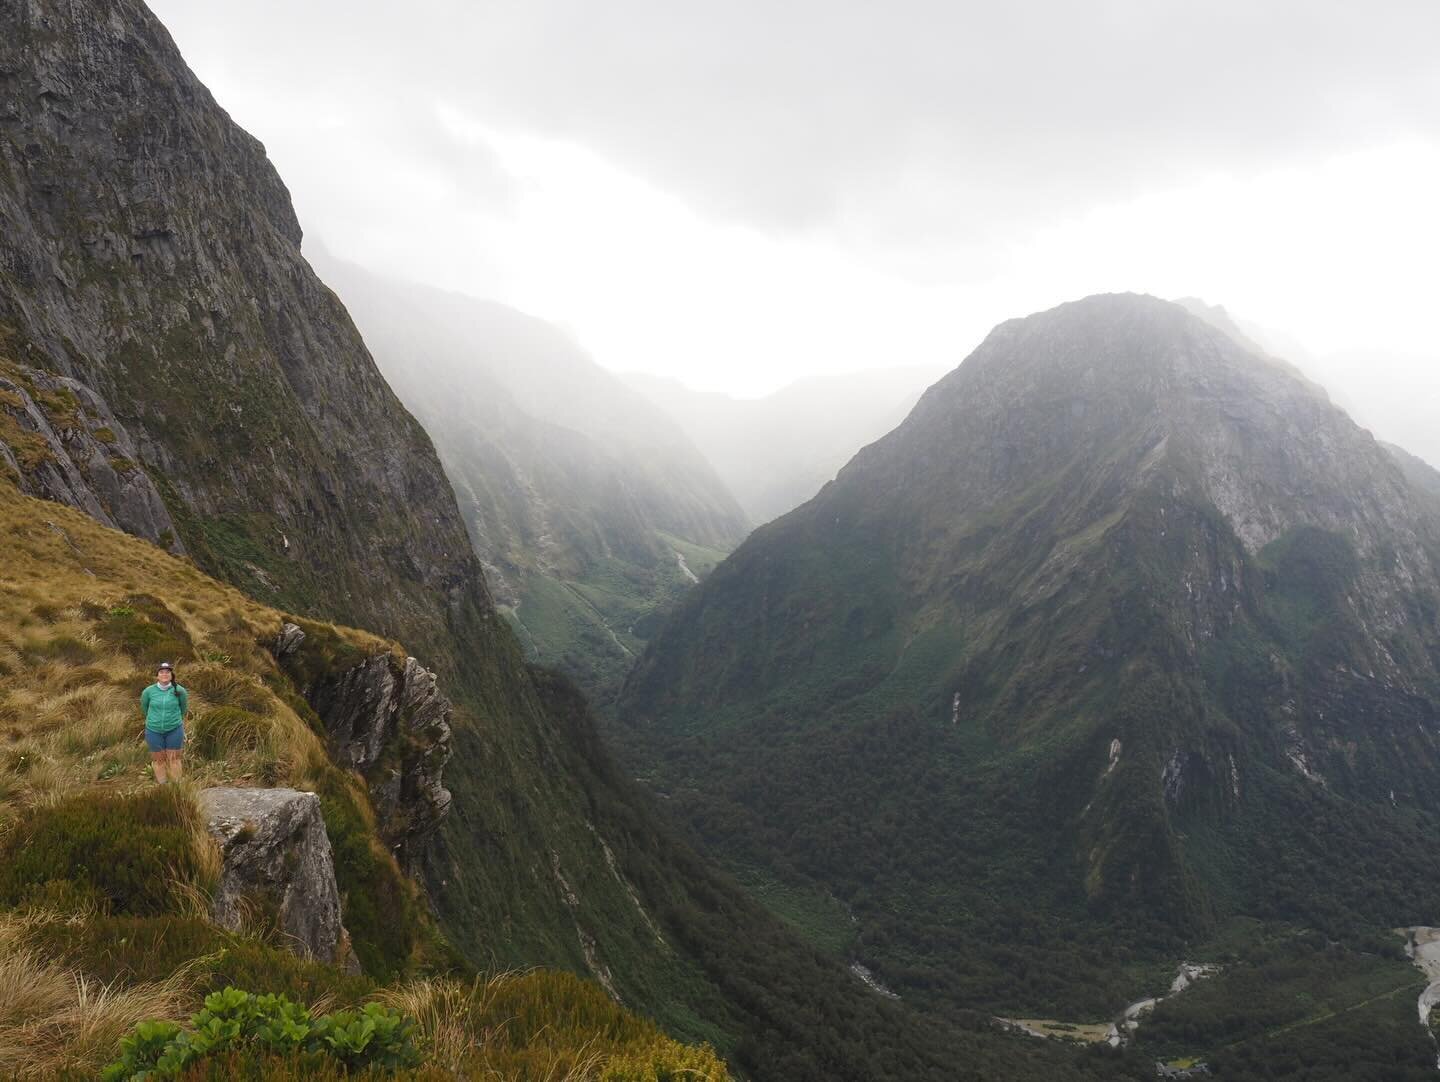 Milford Track round up for the grid! This hike was a dream come true. When I was like&hellip;11?, before I had ever traveled or camped or even really hiked much, I saw a picture of the Milford Sound as a computer desktop screensaver. And I thought it